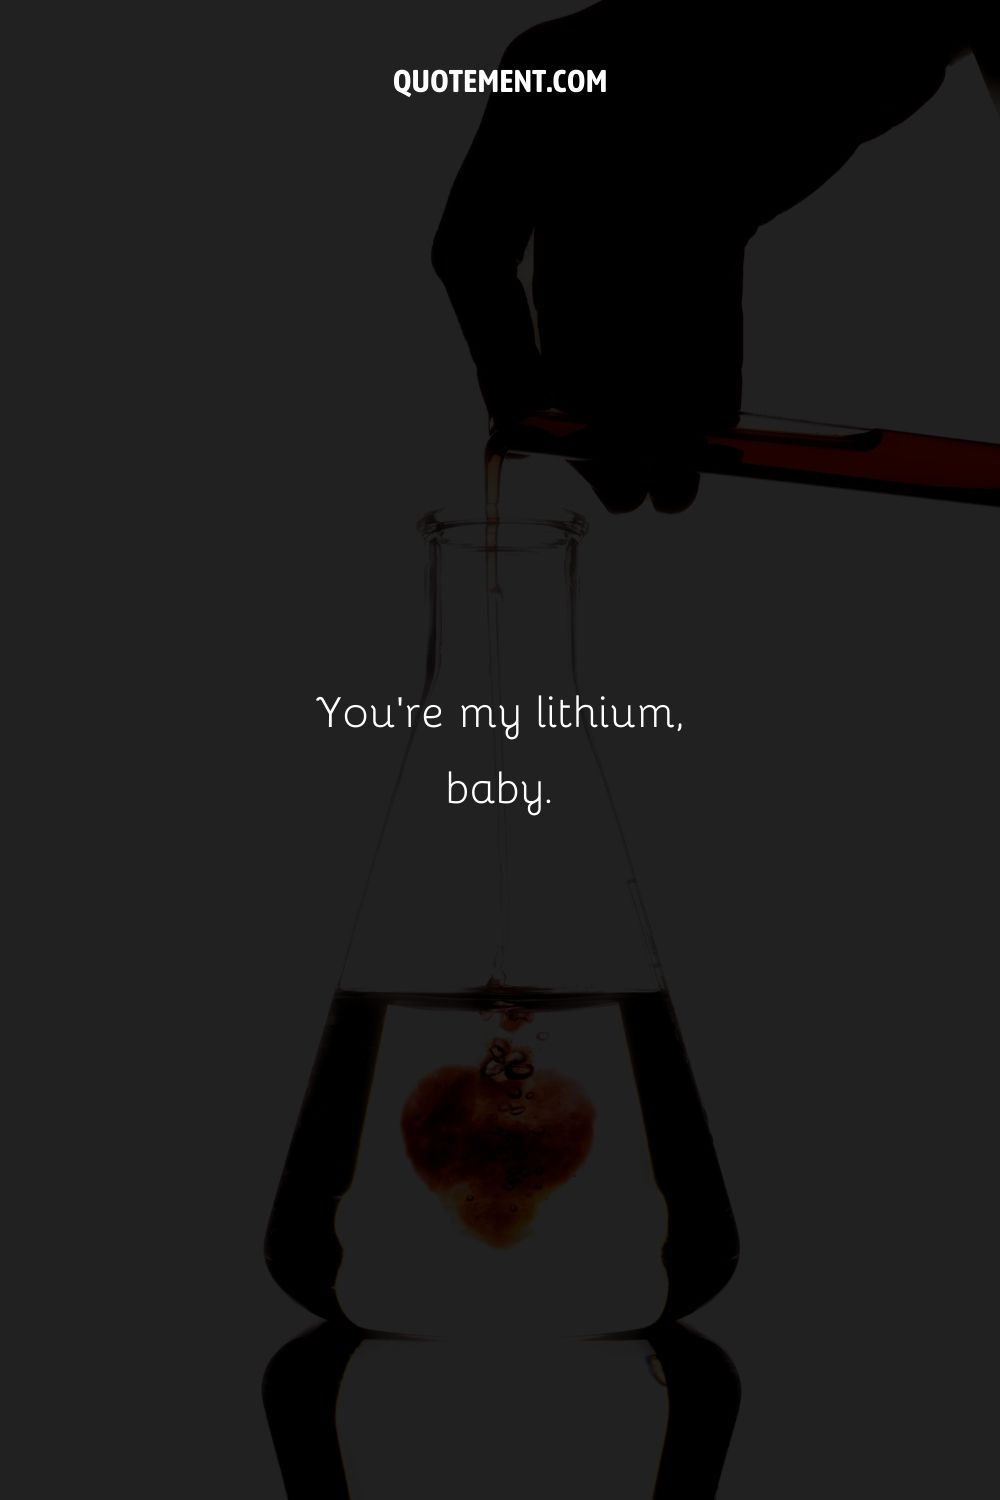 Pick up line related to lithium represented by a person pouring liquid from the pipette into a conical flask